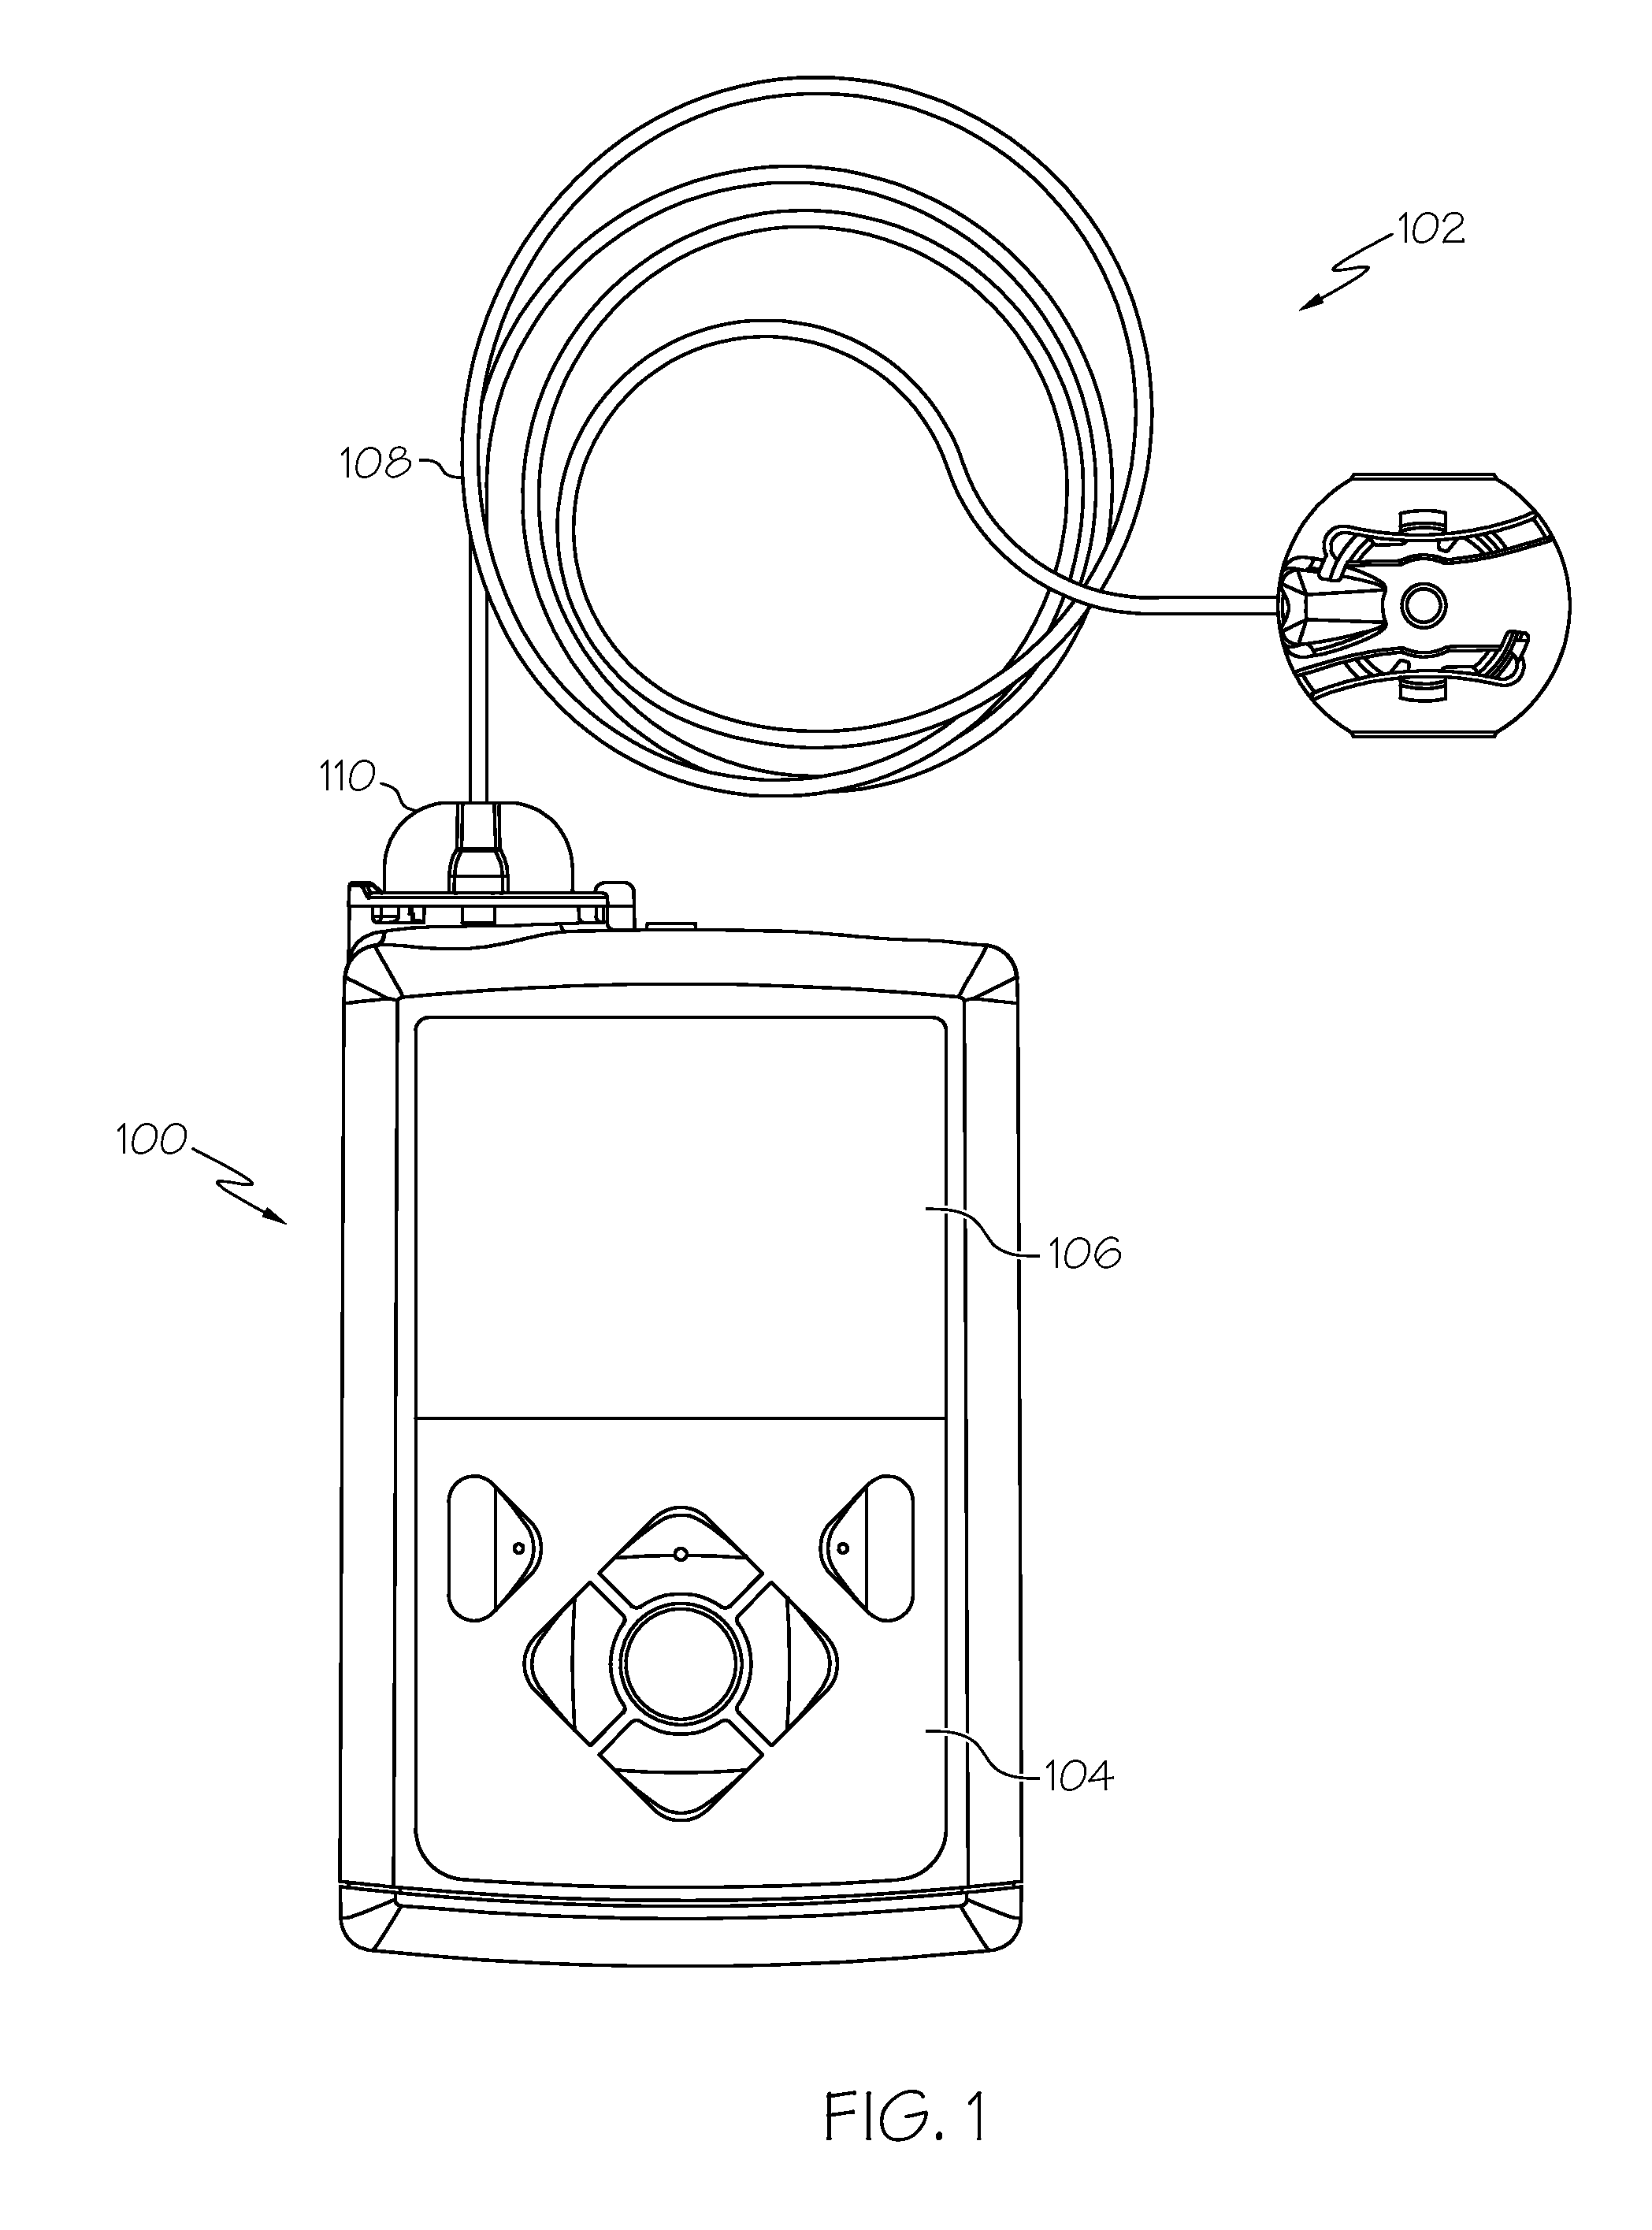 Monitoring the seating status of a fluid reservoir in a fluid infusion device